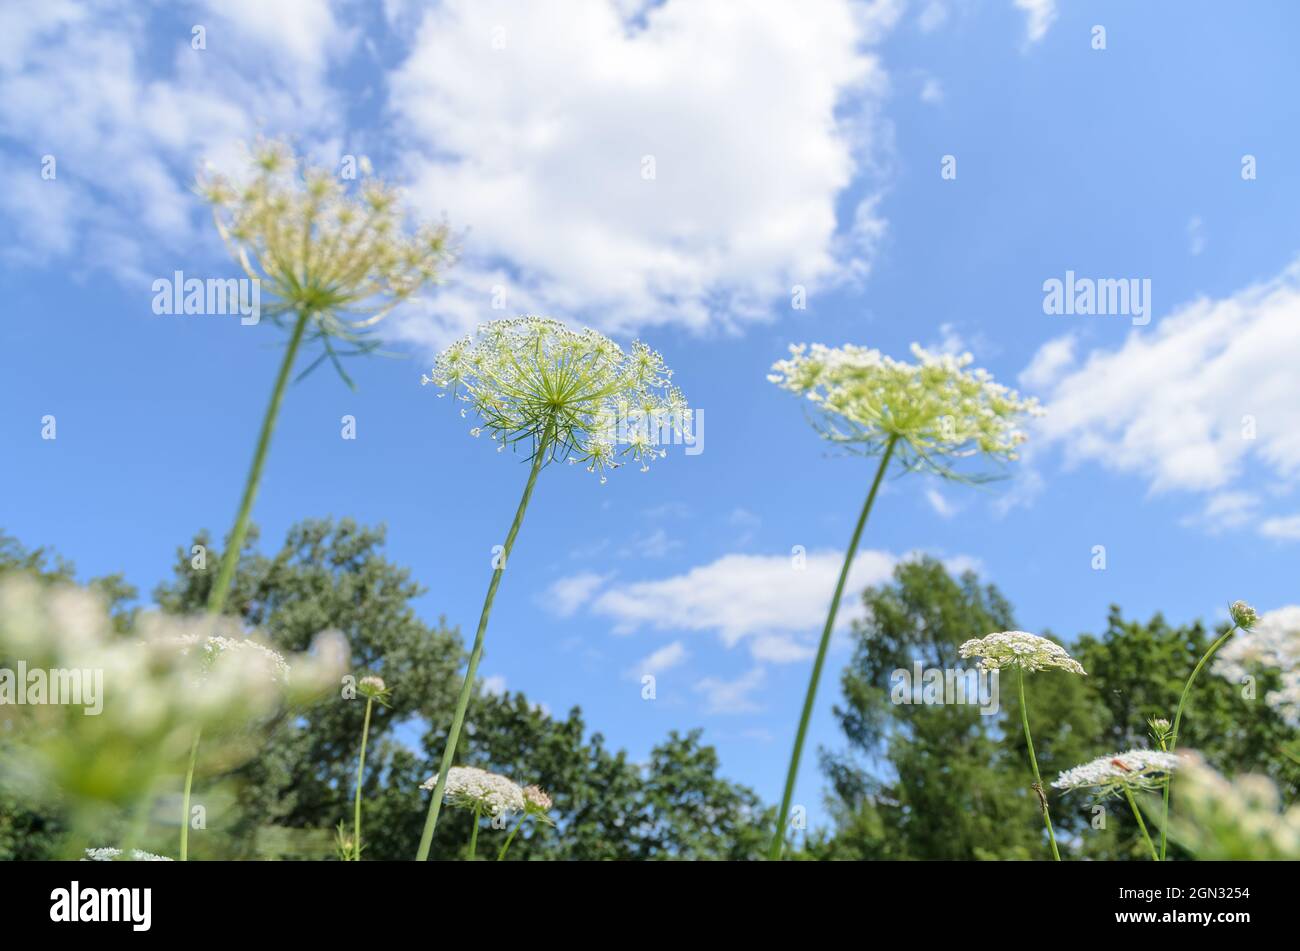 Daucus carota, known as wild carrot, bird's nest, bishop's lace or Queen Anne's lace plant in a meadow against blue sky in Germany, Europe Stock Photo